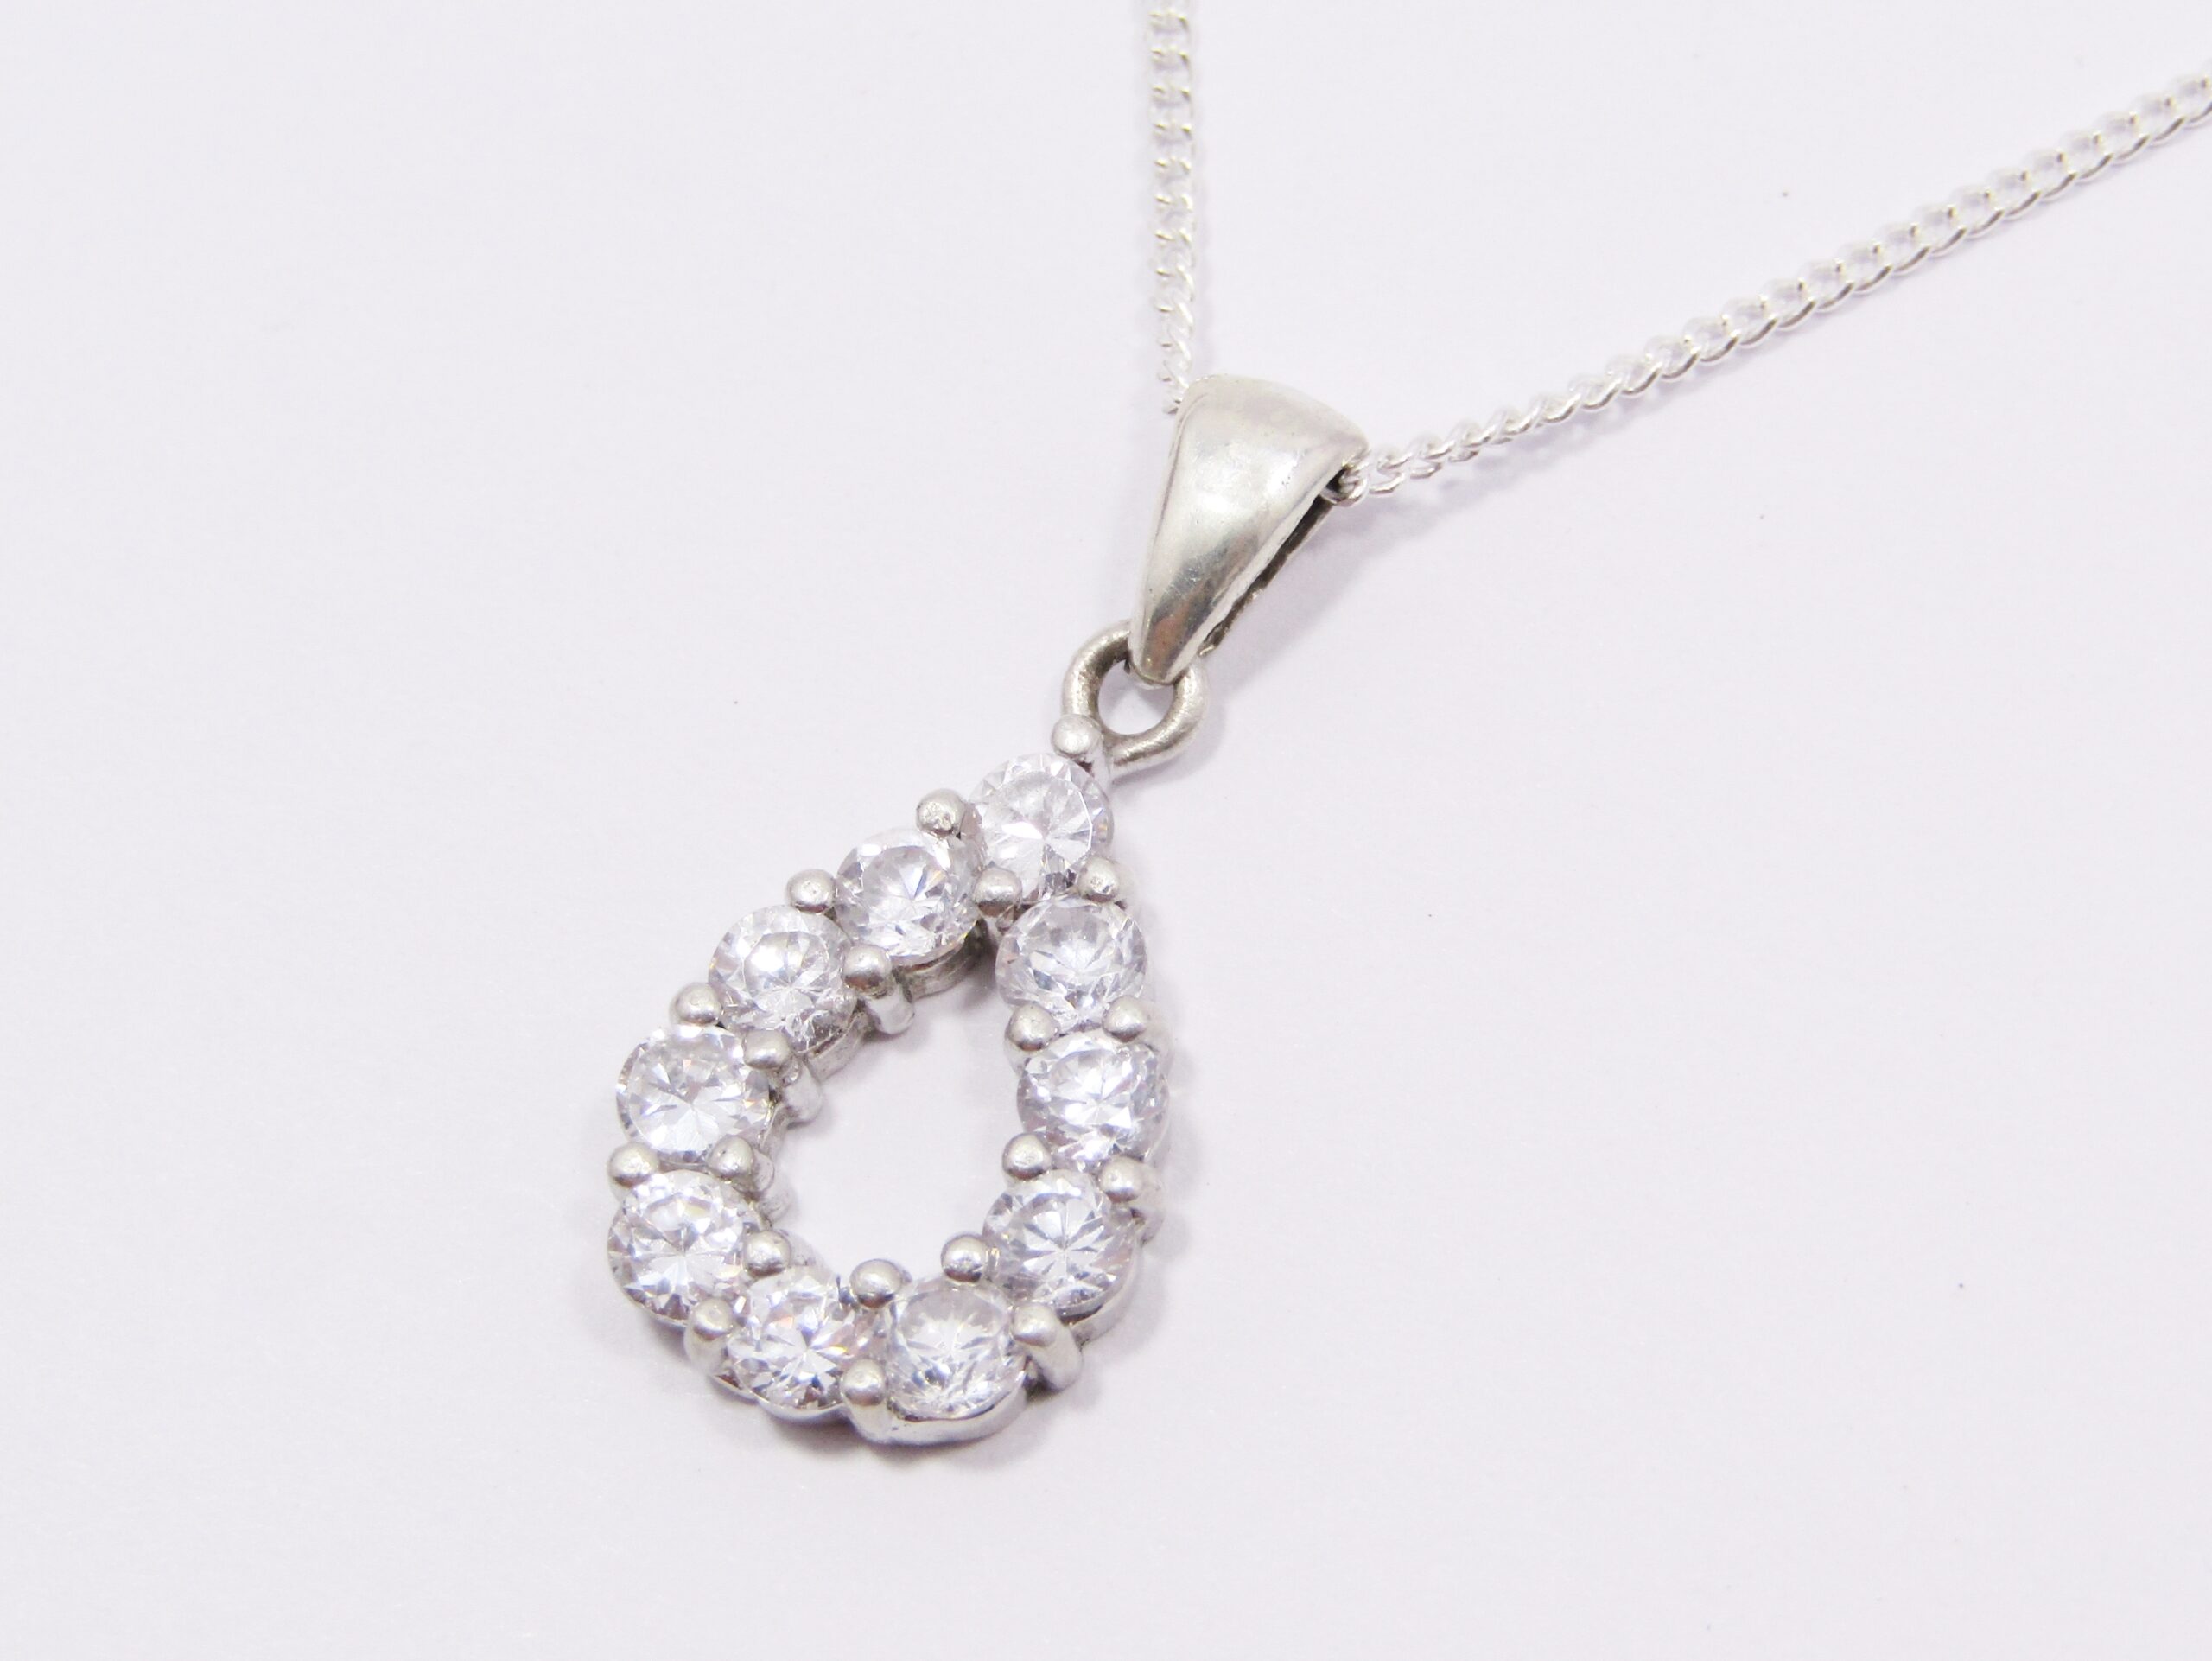 A Lovely Clear Zirconia Pendant on Chain in Sterling Silver